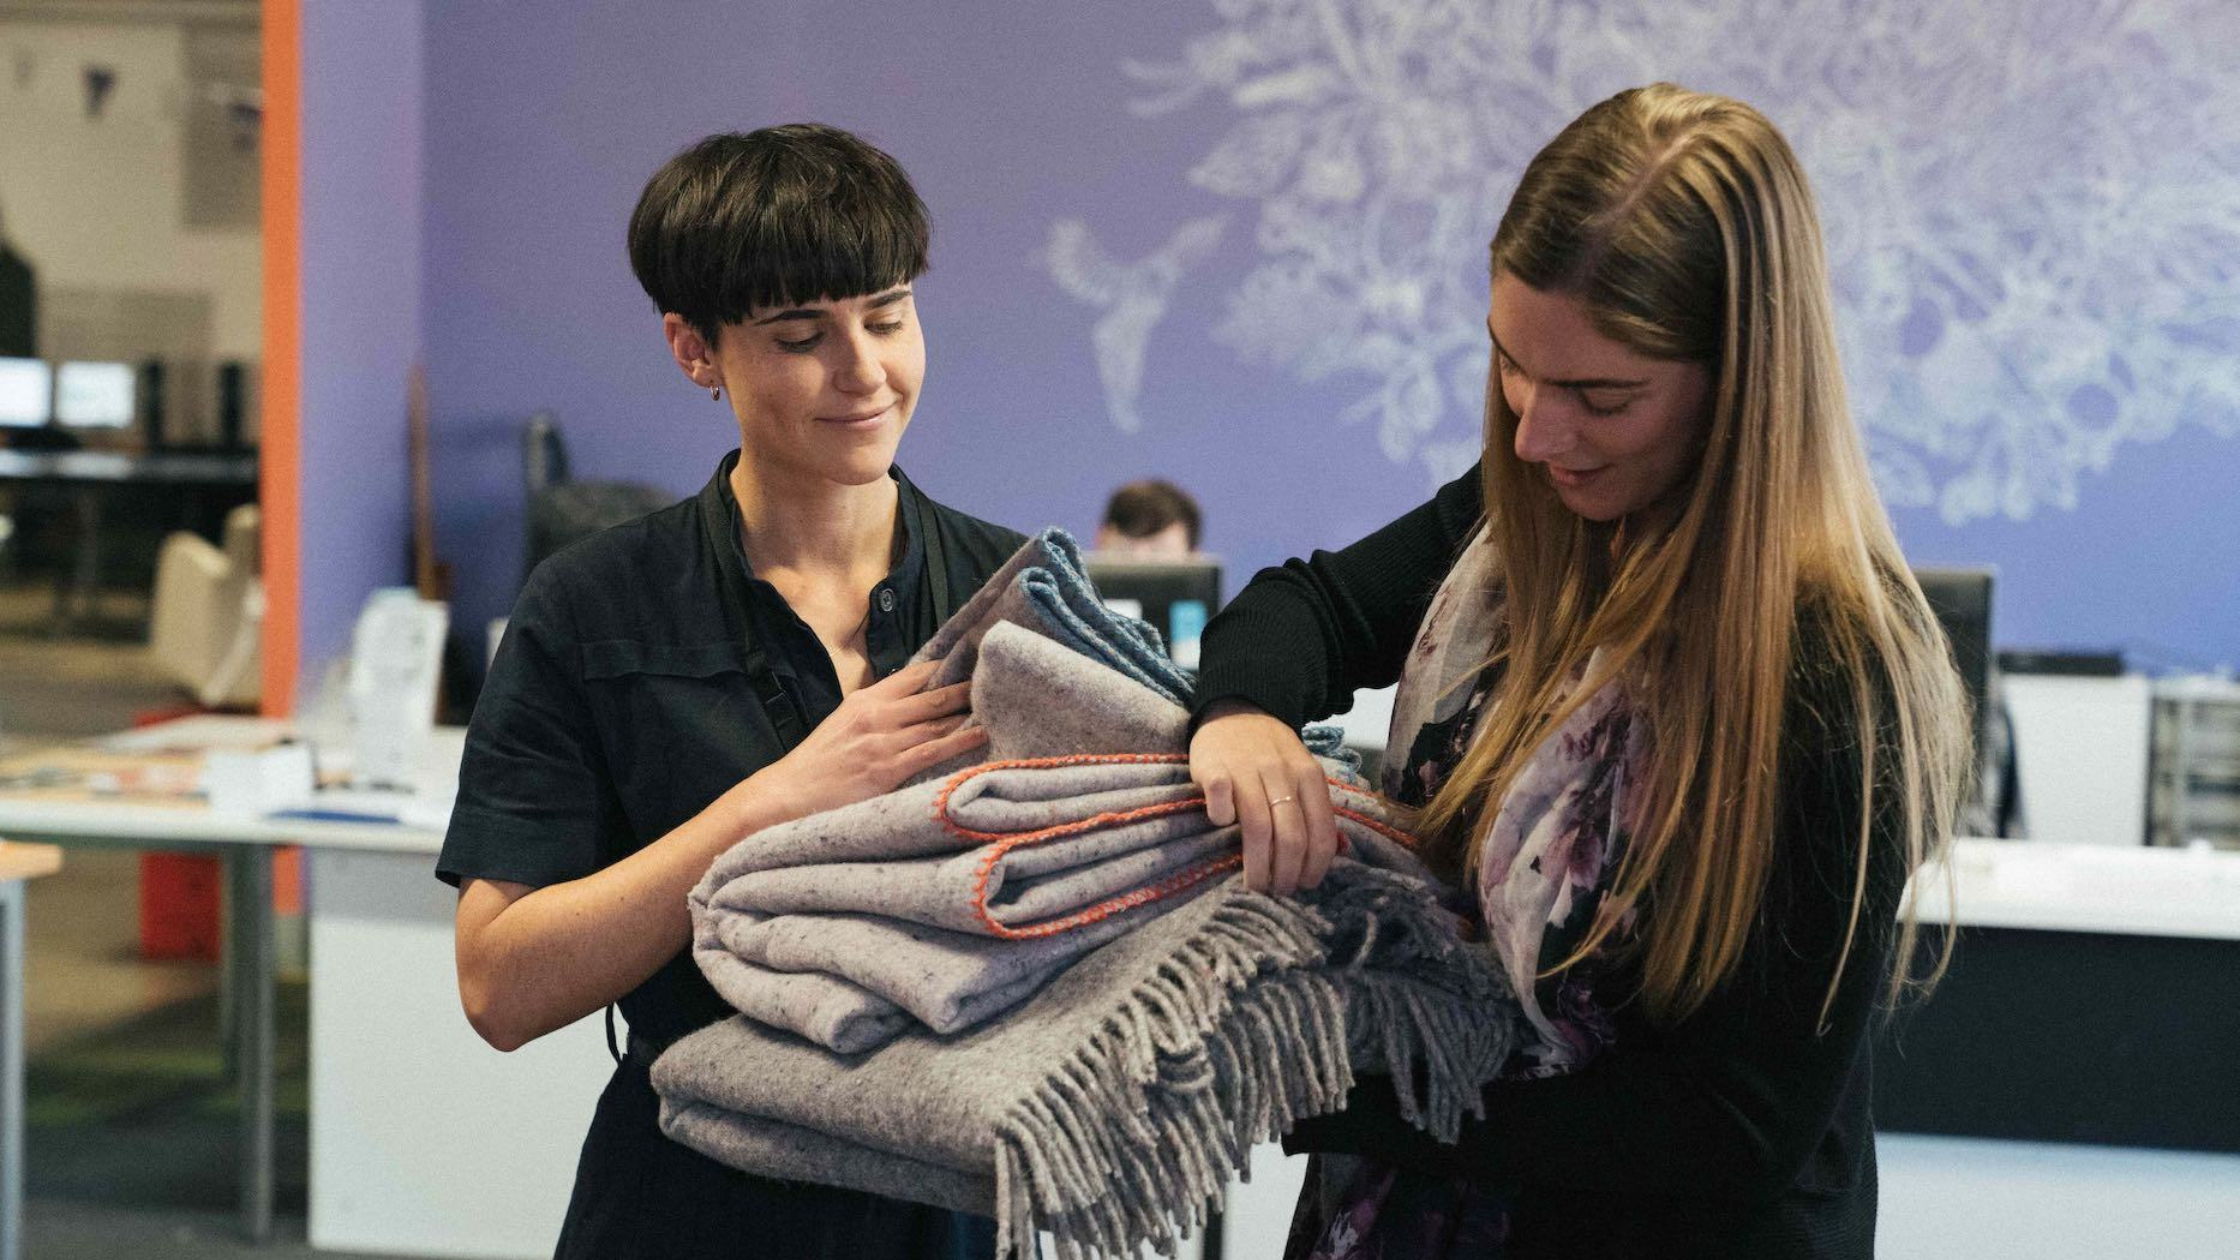 Seljak Brand donate to the ASRC. Seljak Brand has donated 284 blankets and $8595 to the ASRC.